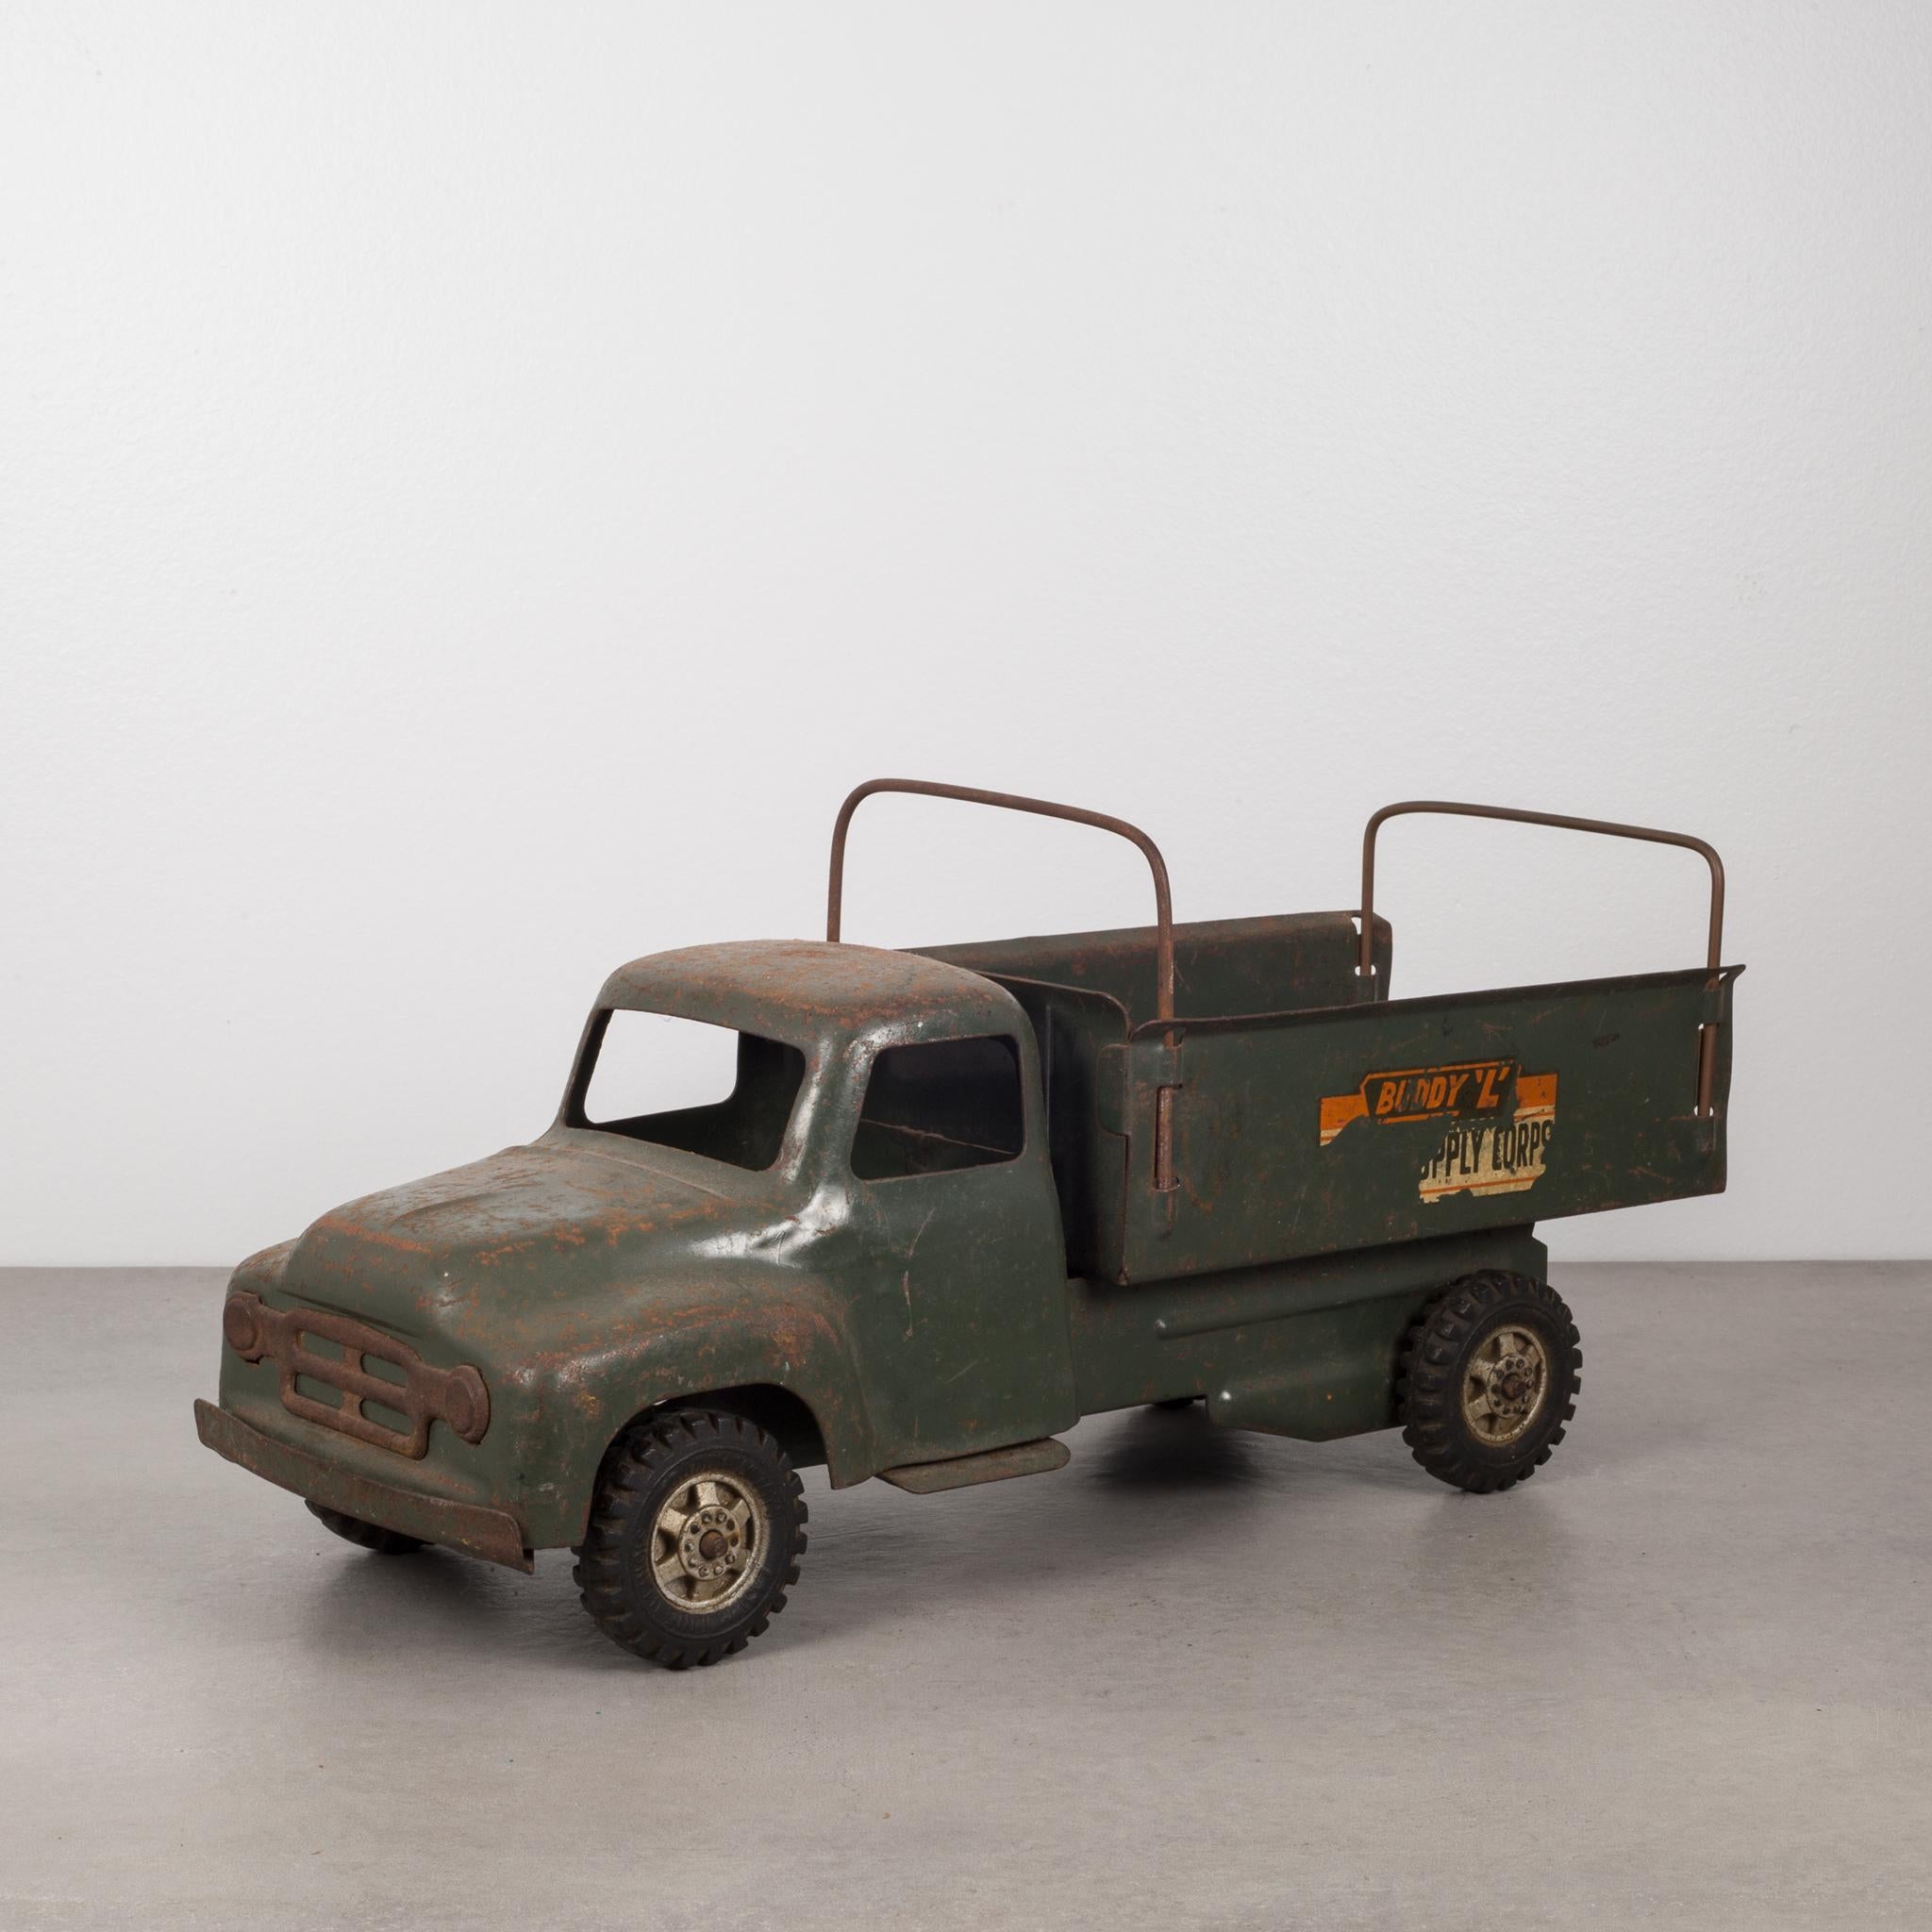 About

This is an original die cast steel toy truck with rubber wheels, finished in army-green powder coating by the Buddy L Corporation. The truck has advertising on both sides that reads 